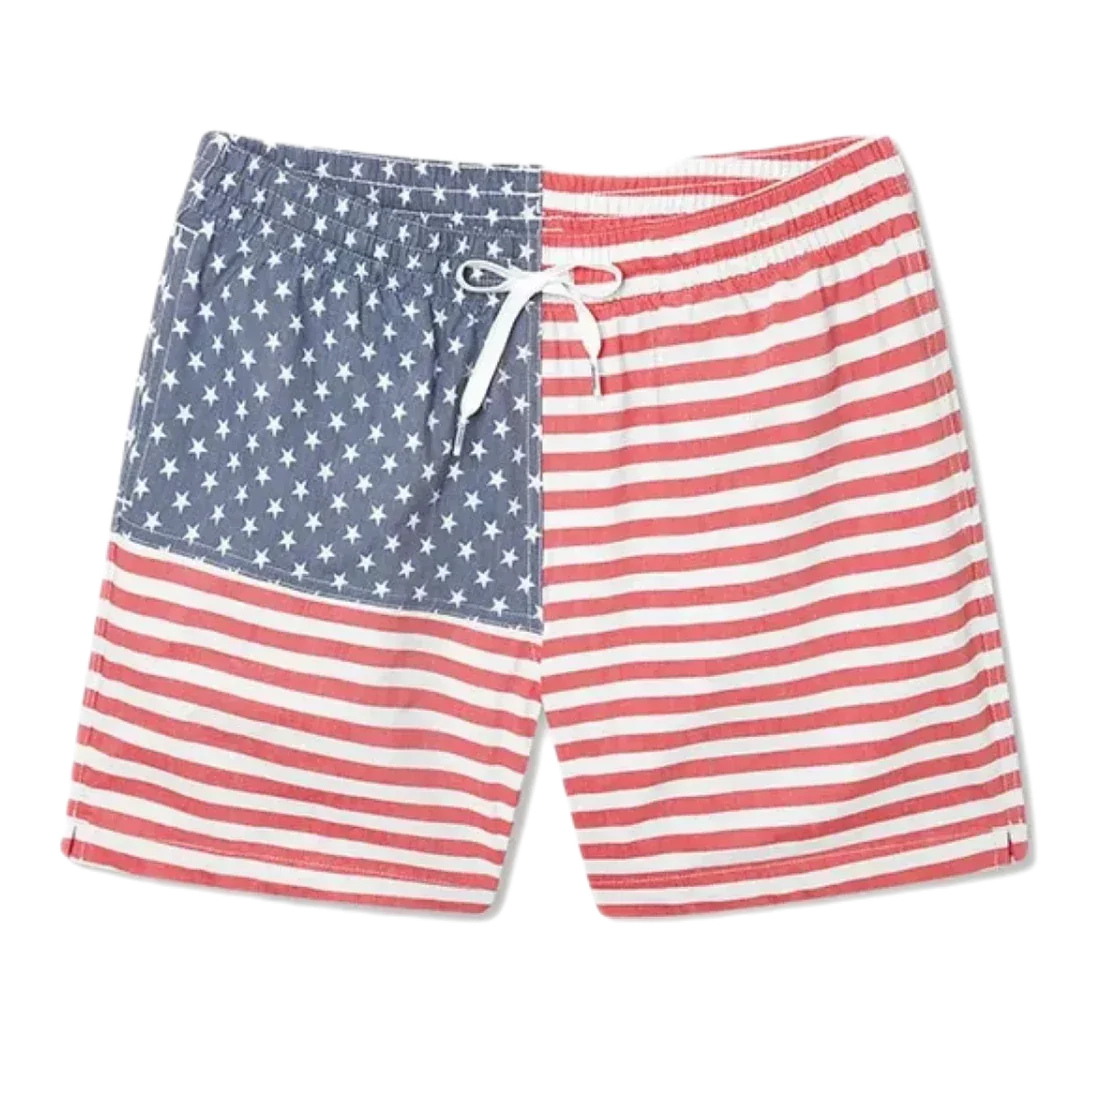 Chubbies 01. MENS APPAREL - MENS SHORTS - MENS SHORTS ACTIVE Men's The Classic Trunk - 5.5 in THE MERICAS